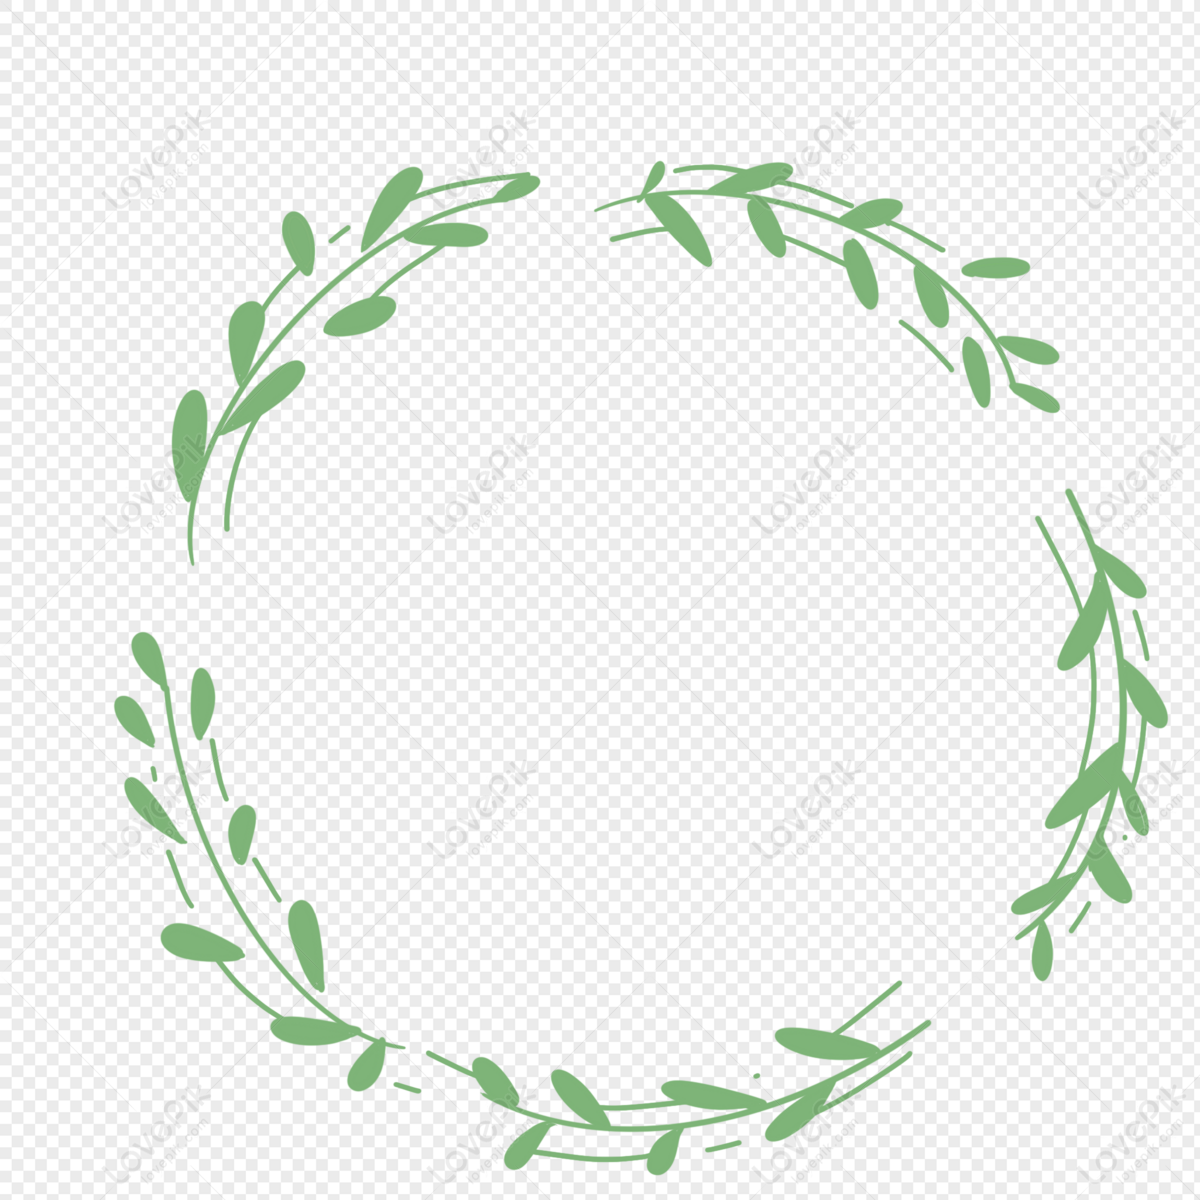 Green Border PNG Transparent Image And Clipart Image For Free Download ...